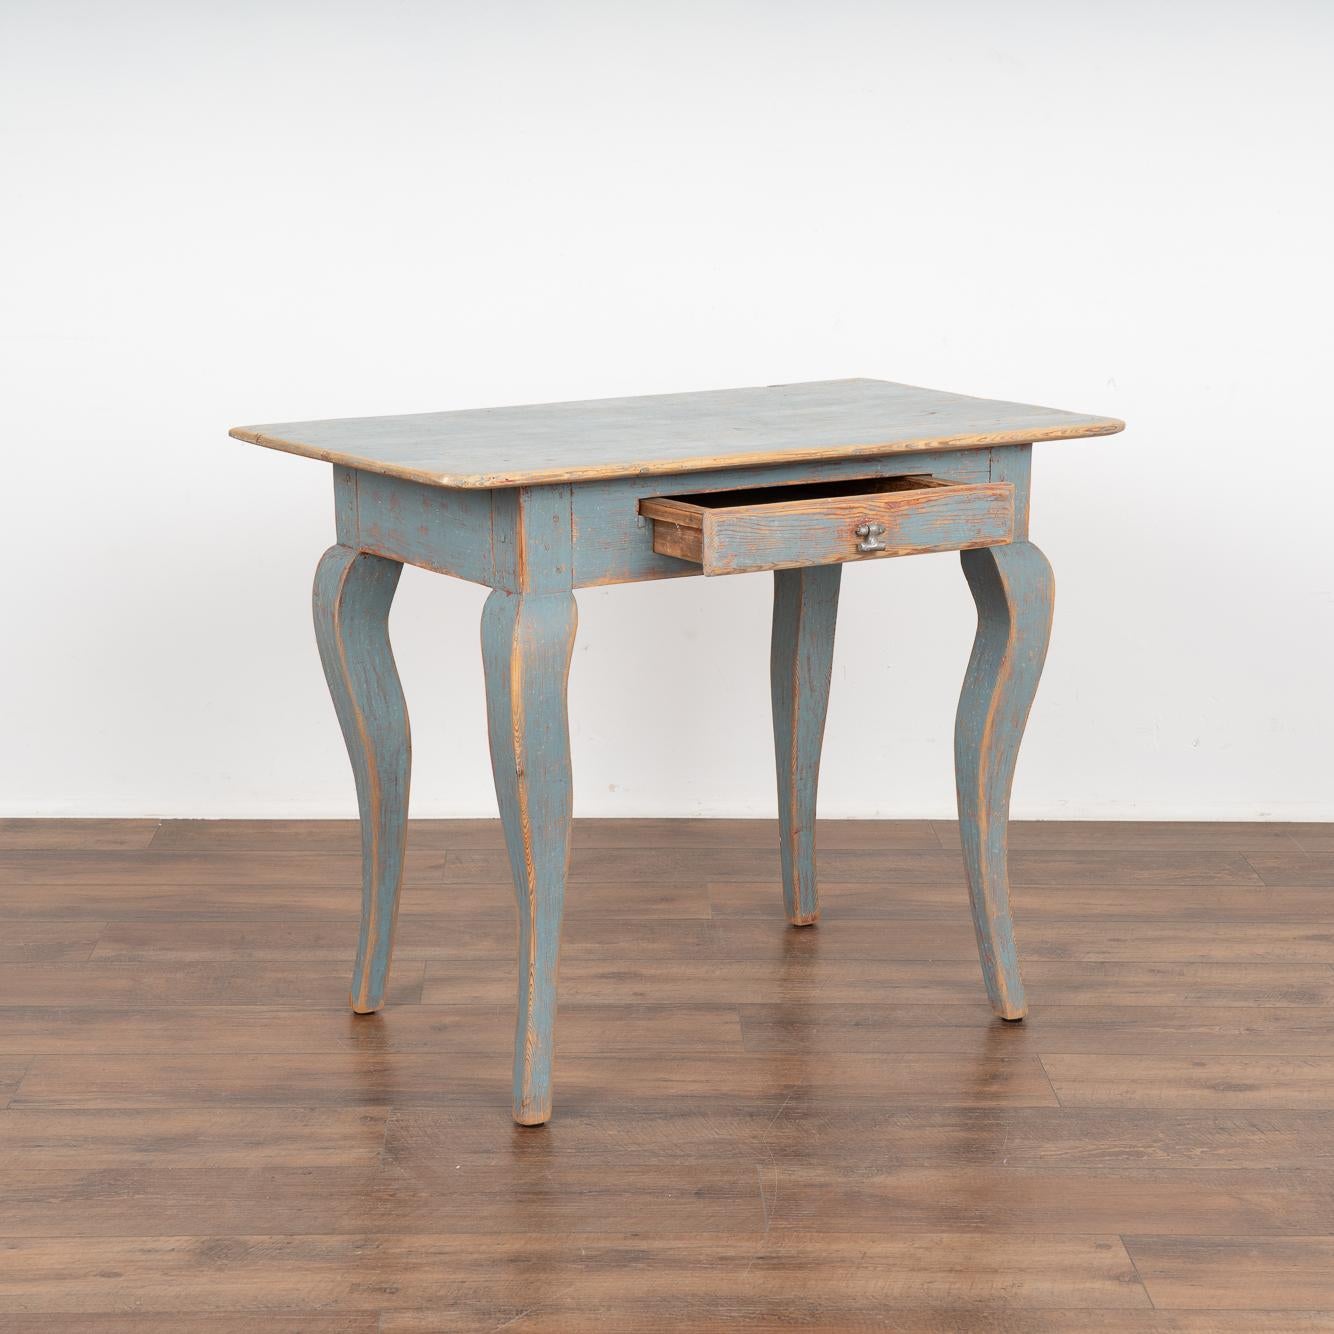 Country Blue Painted Pine Side Table With Cabriolet Legs, Sweden circa 1820-40 For Sale